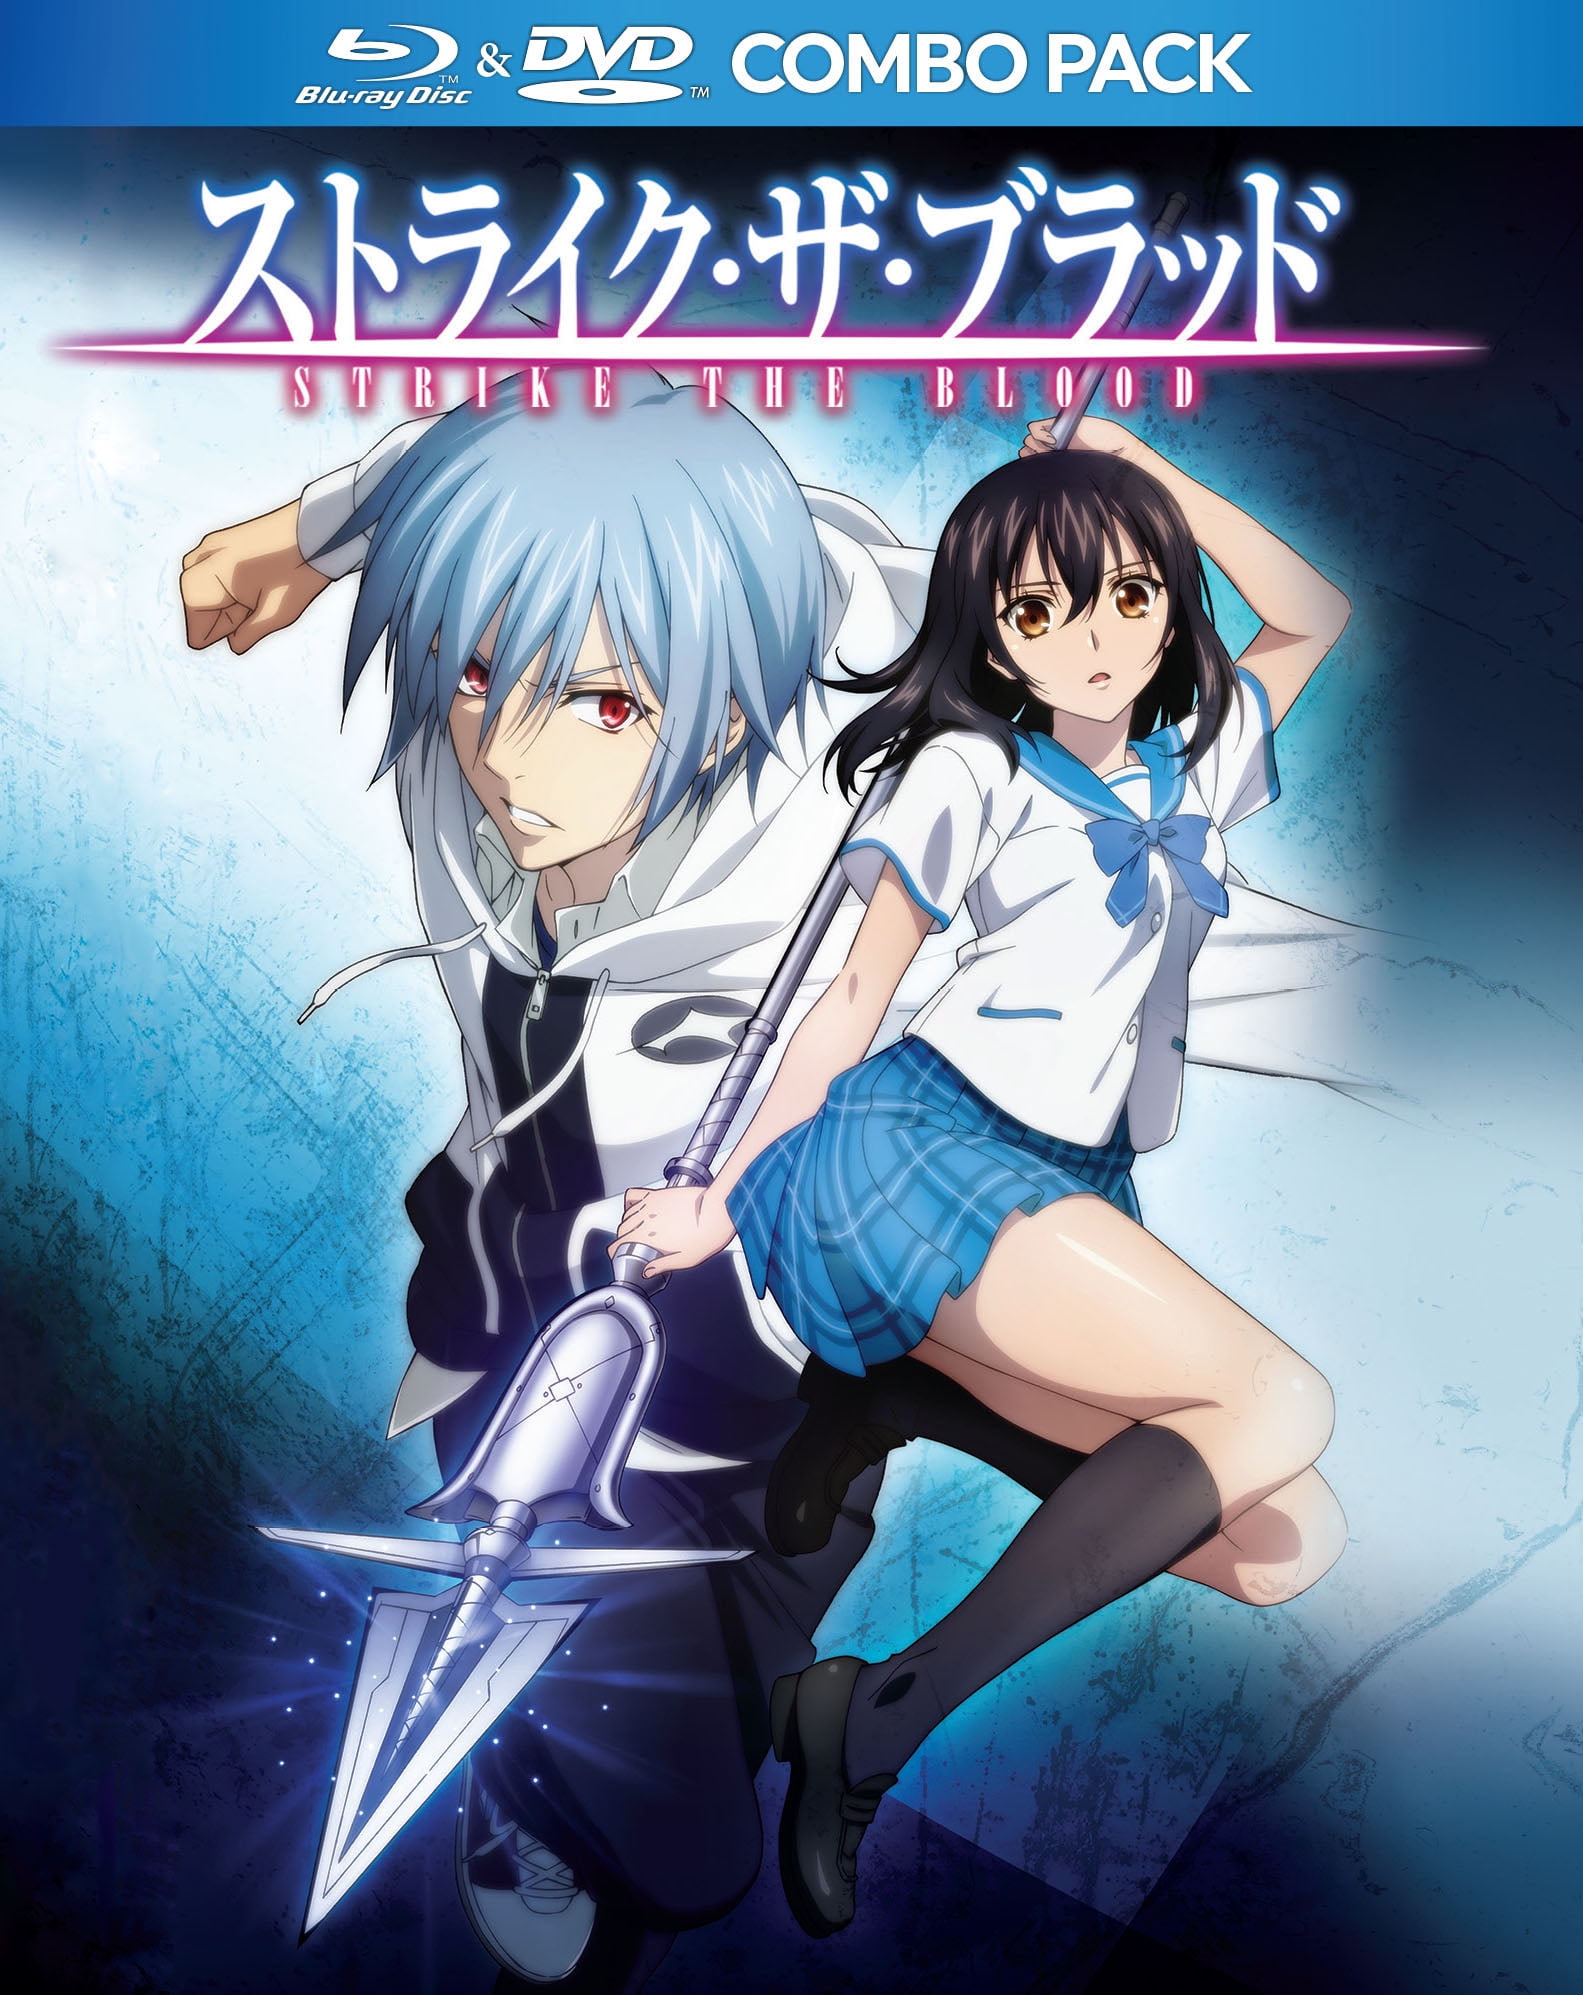 Strike the Blood Season 1: Where To Watch Every Episode